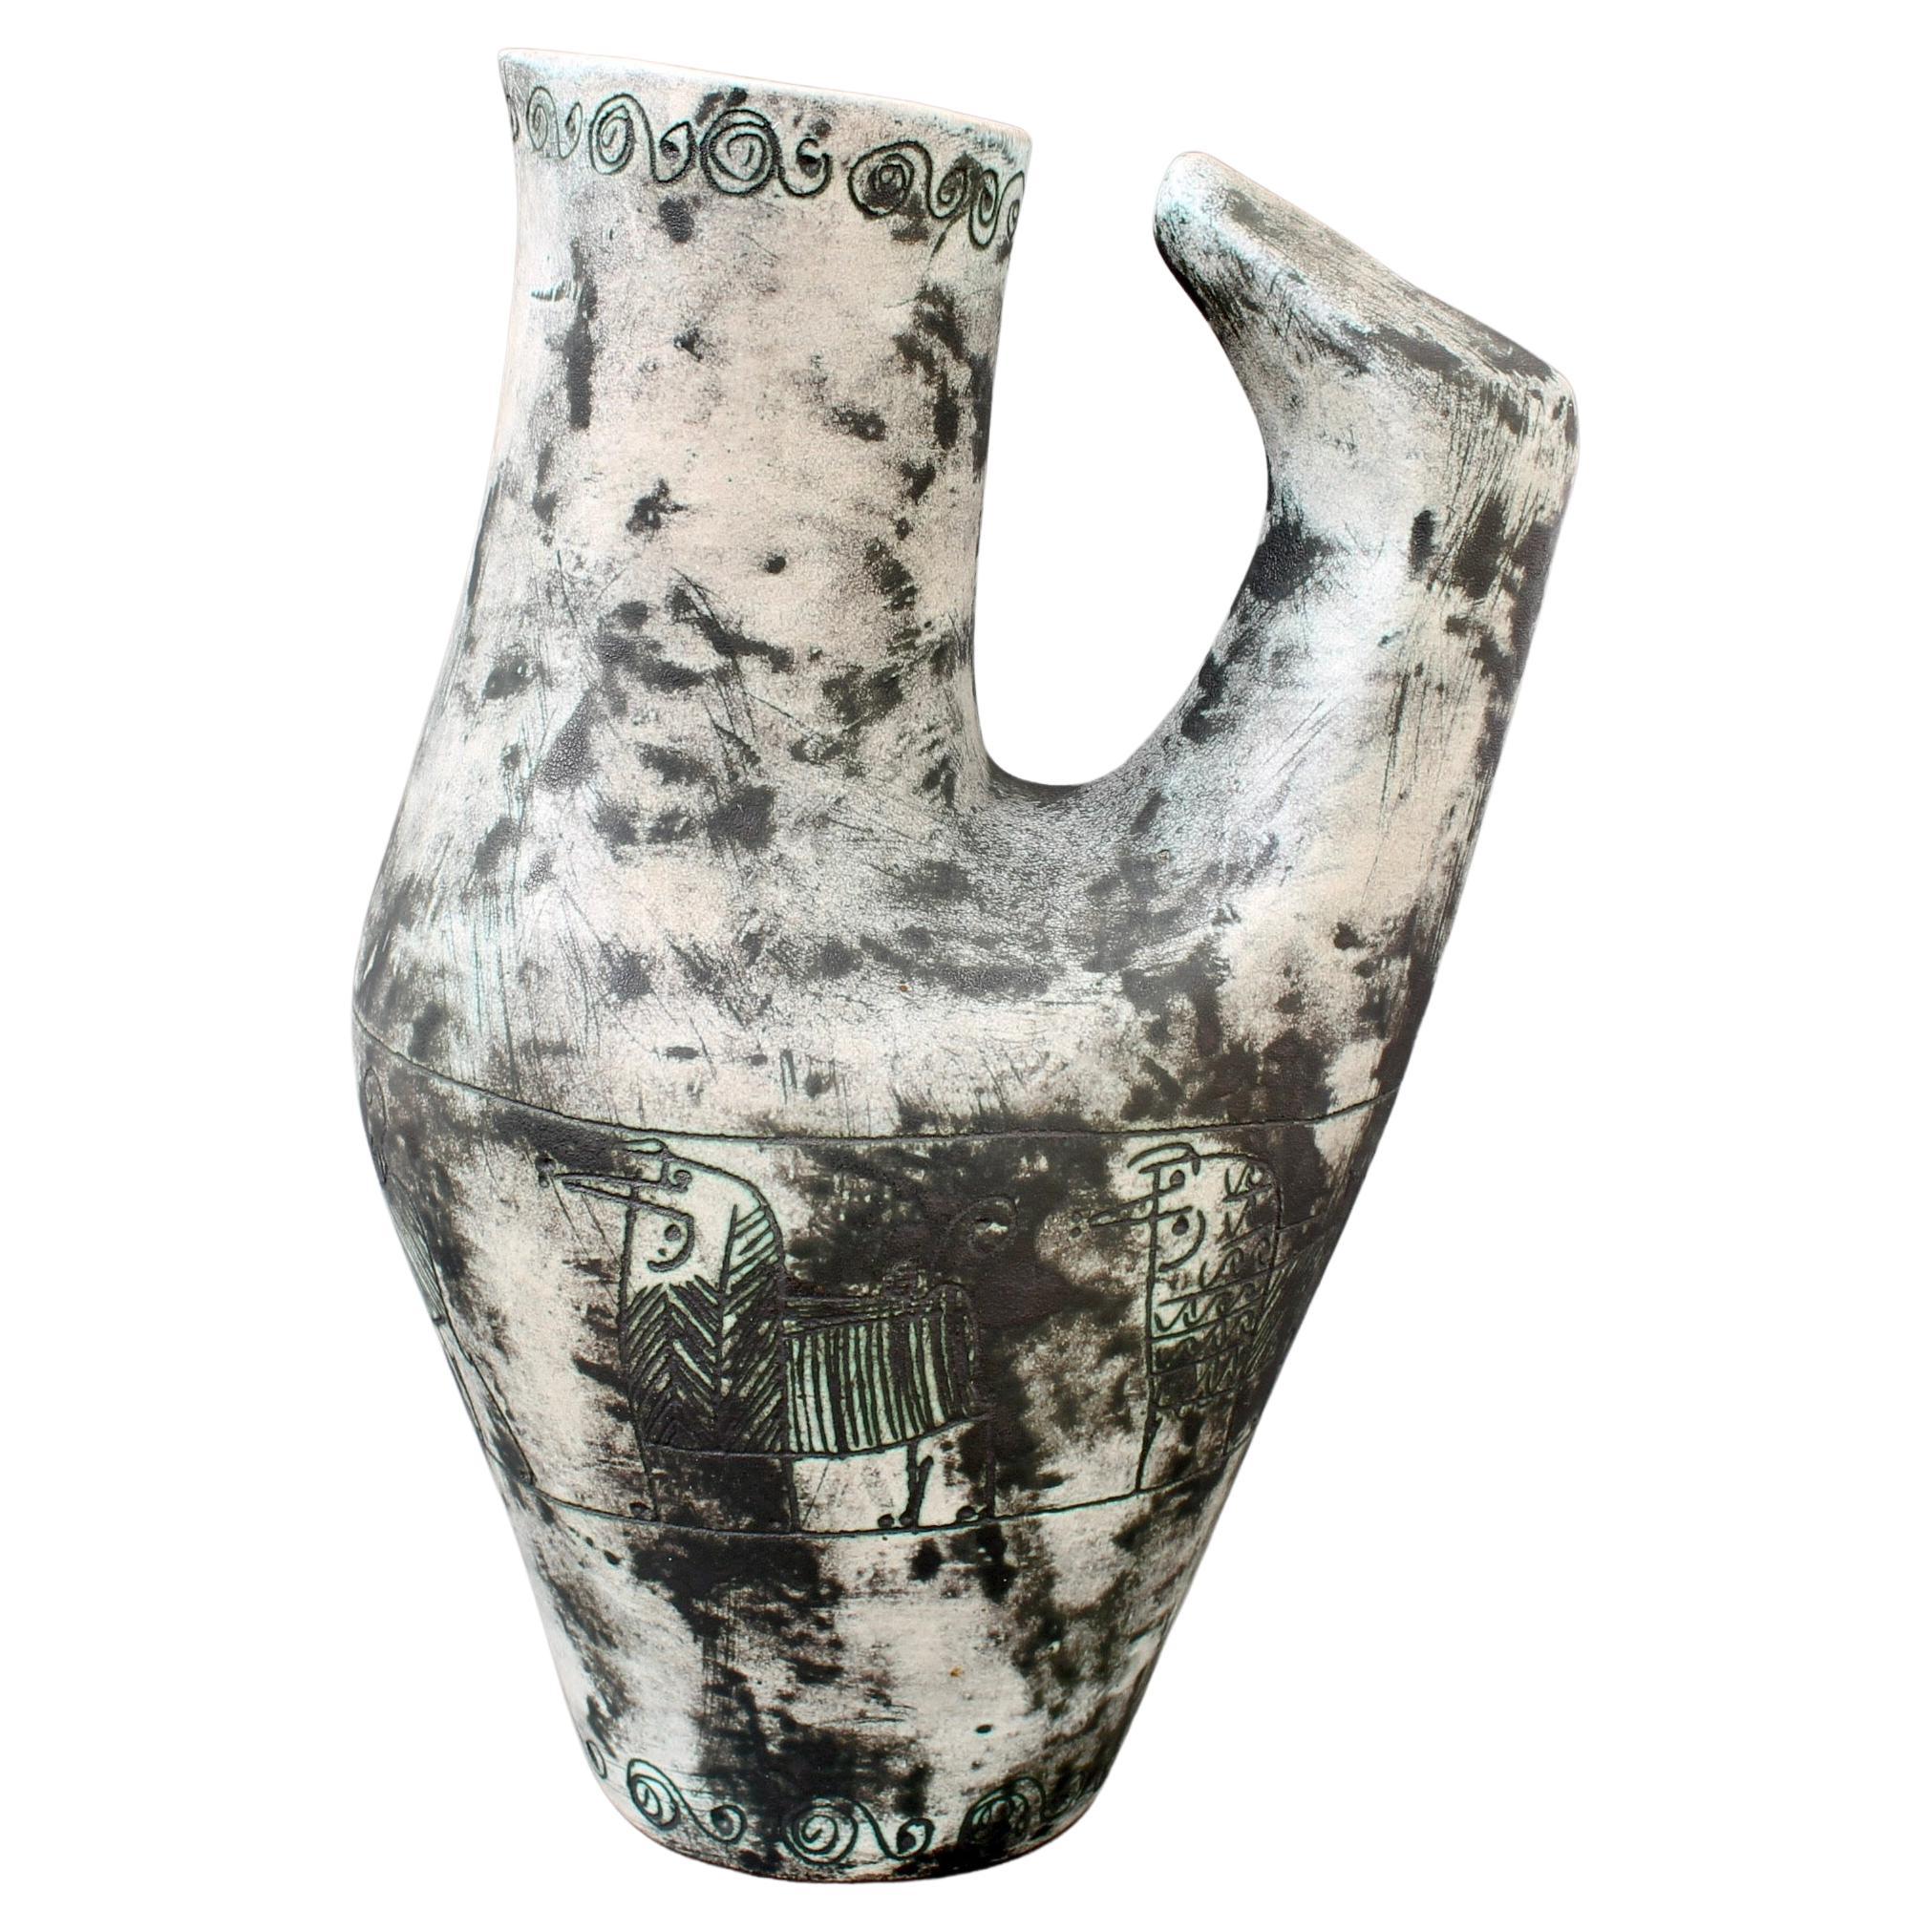 Vintage French Ceramic Zoomorphic Pitcher by Jacques Blin 'circa 1950s'